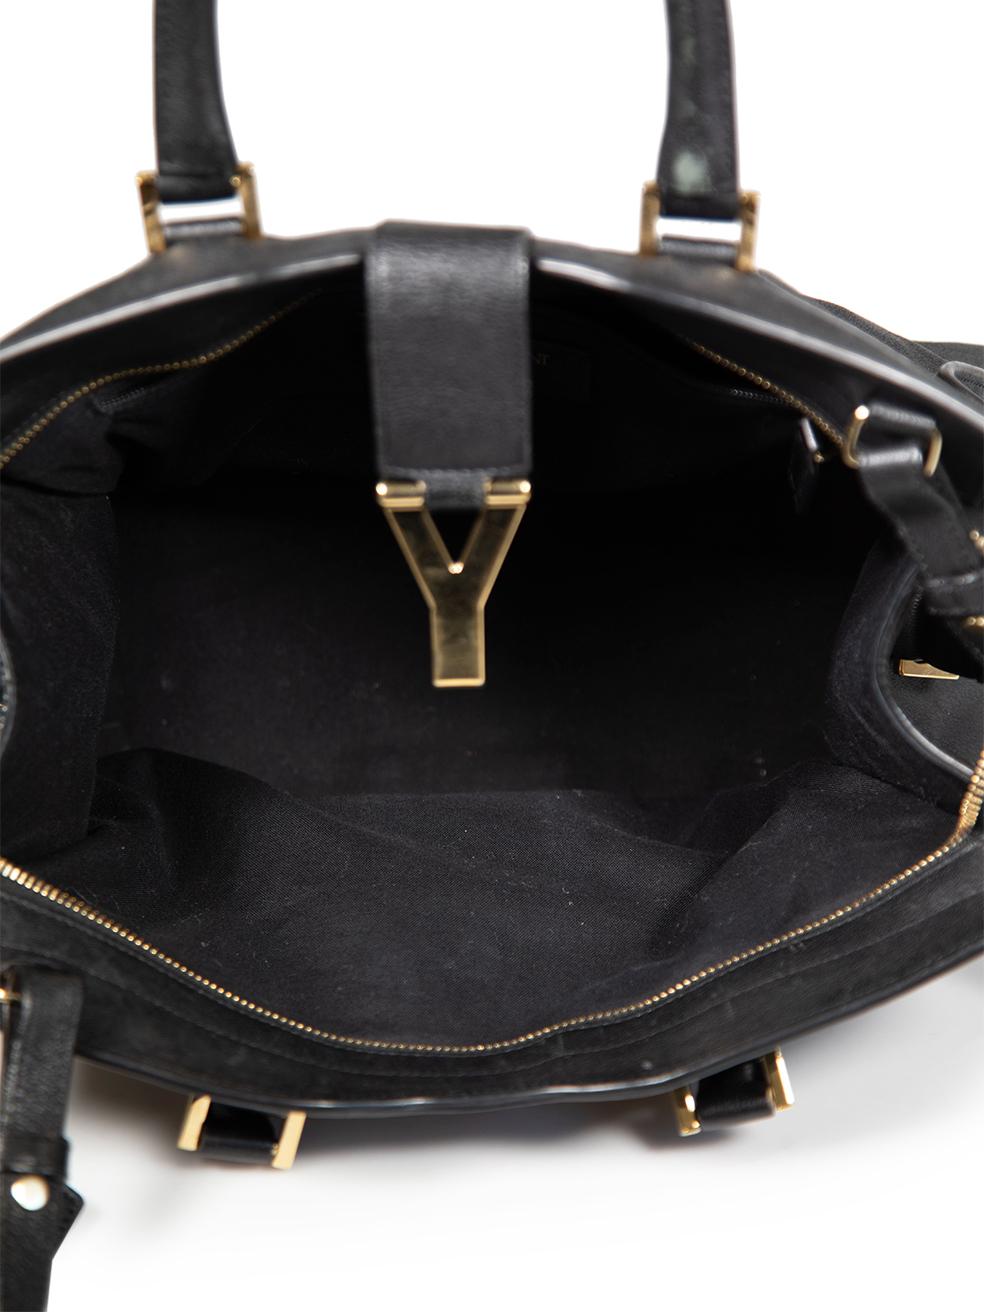 Saint Laurent Black Leather Small Chyc Cabas Tote For Sale 1